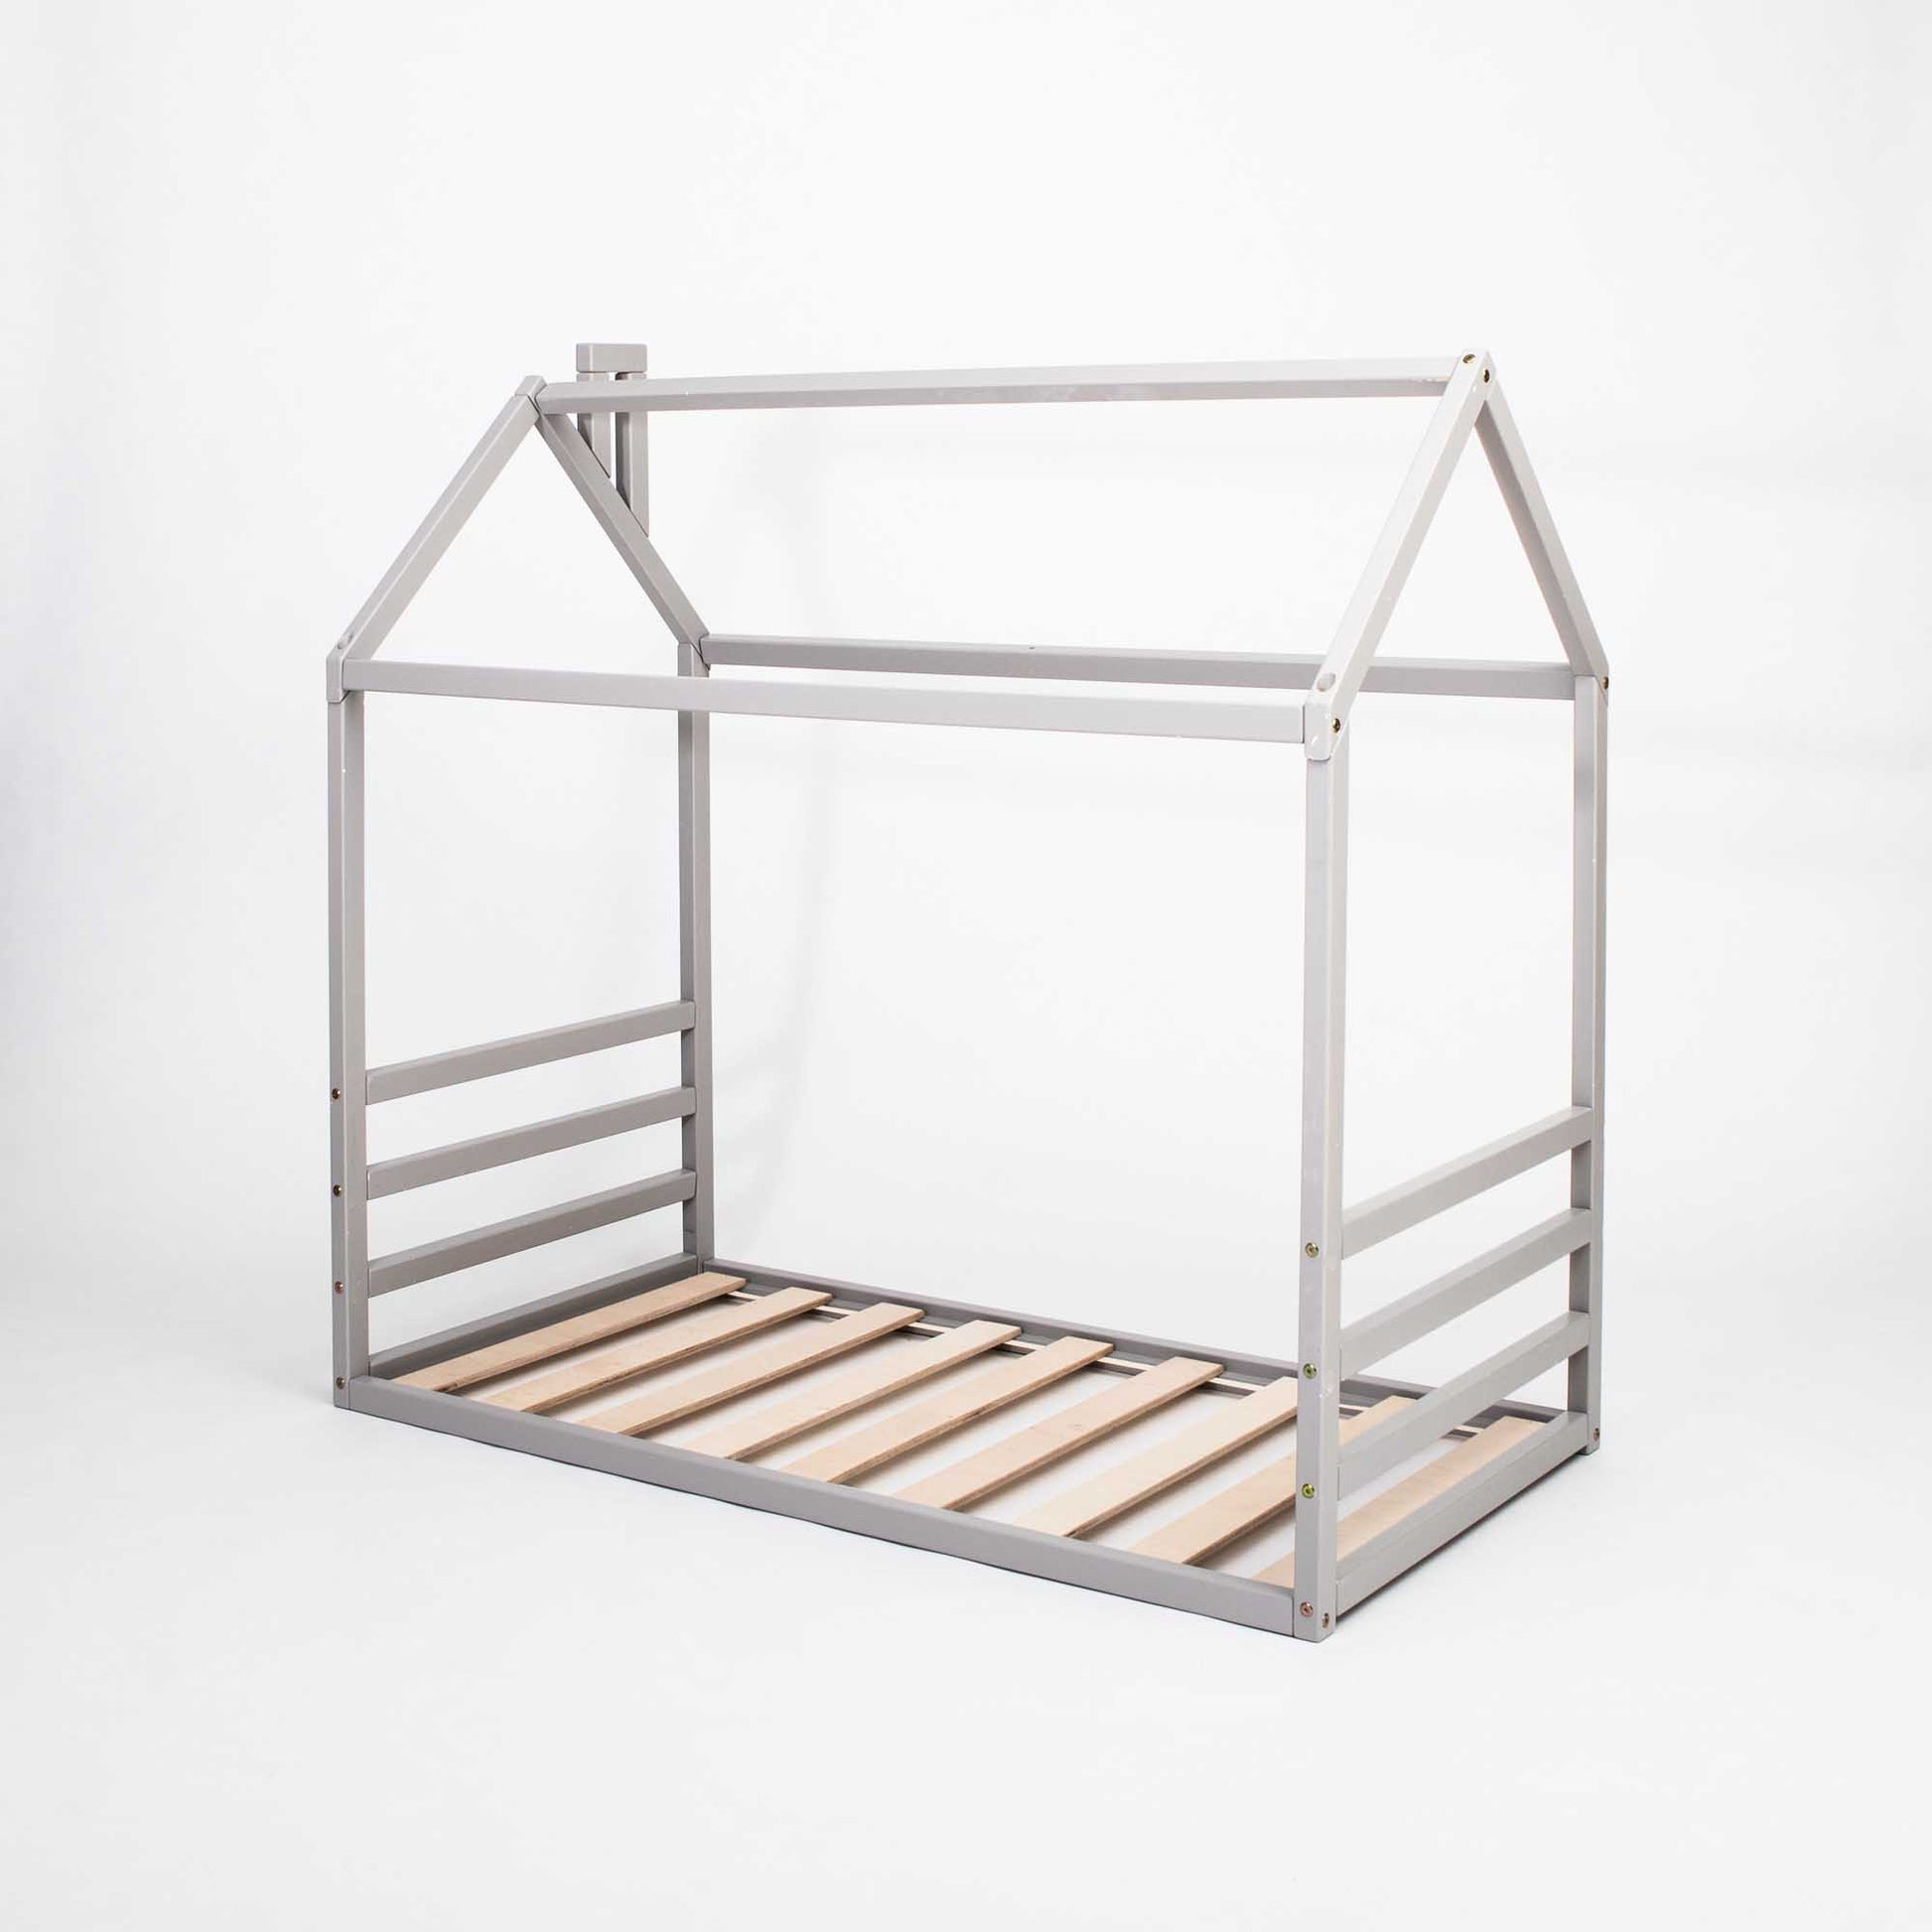 A grey metal floor house-frame bed with wooden slats, perfect as a montessori floor bed for toddlers.